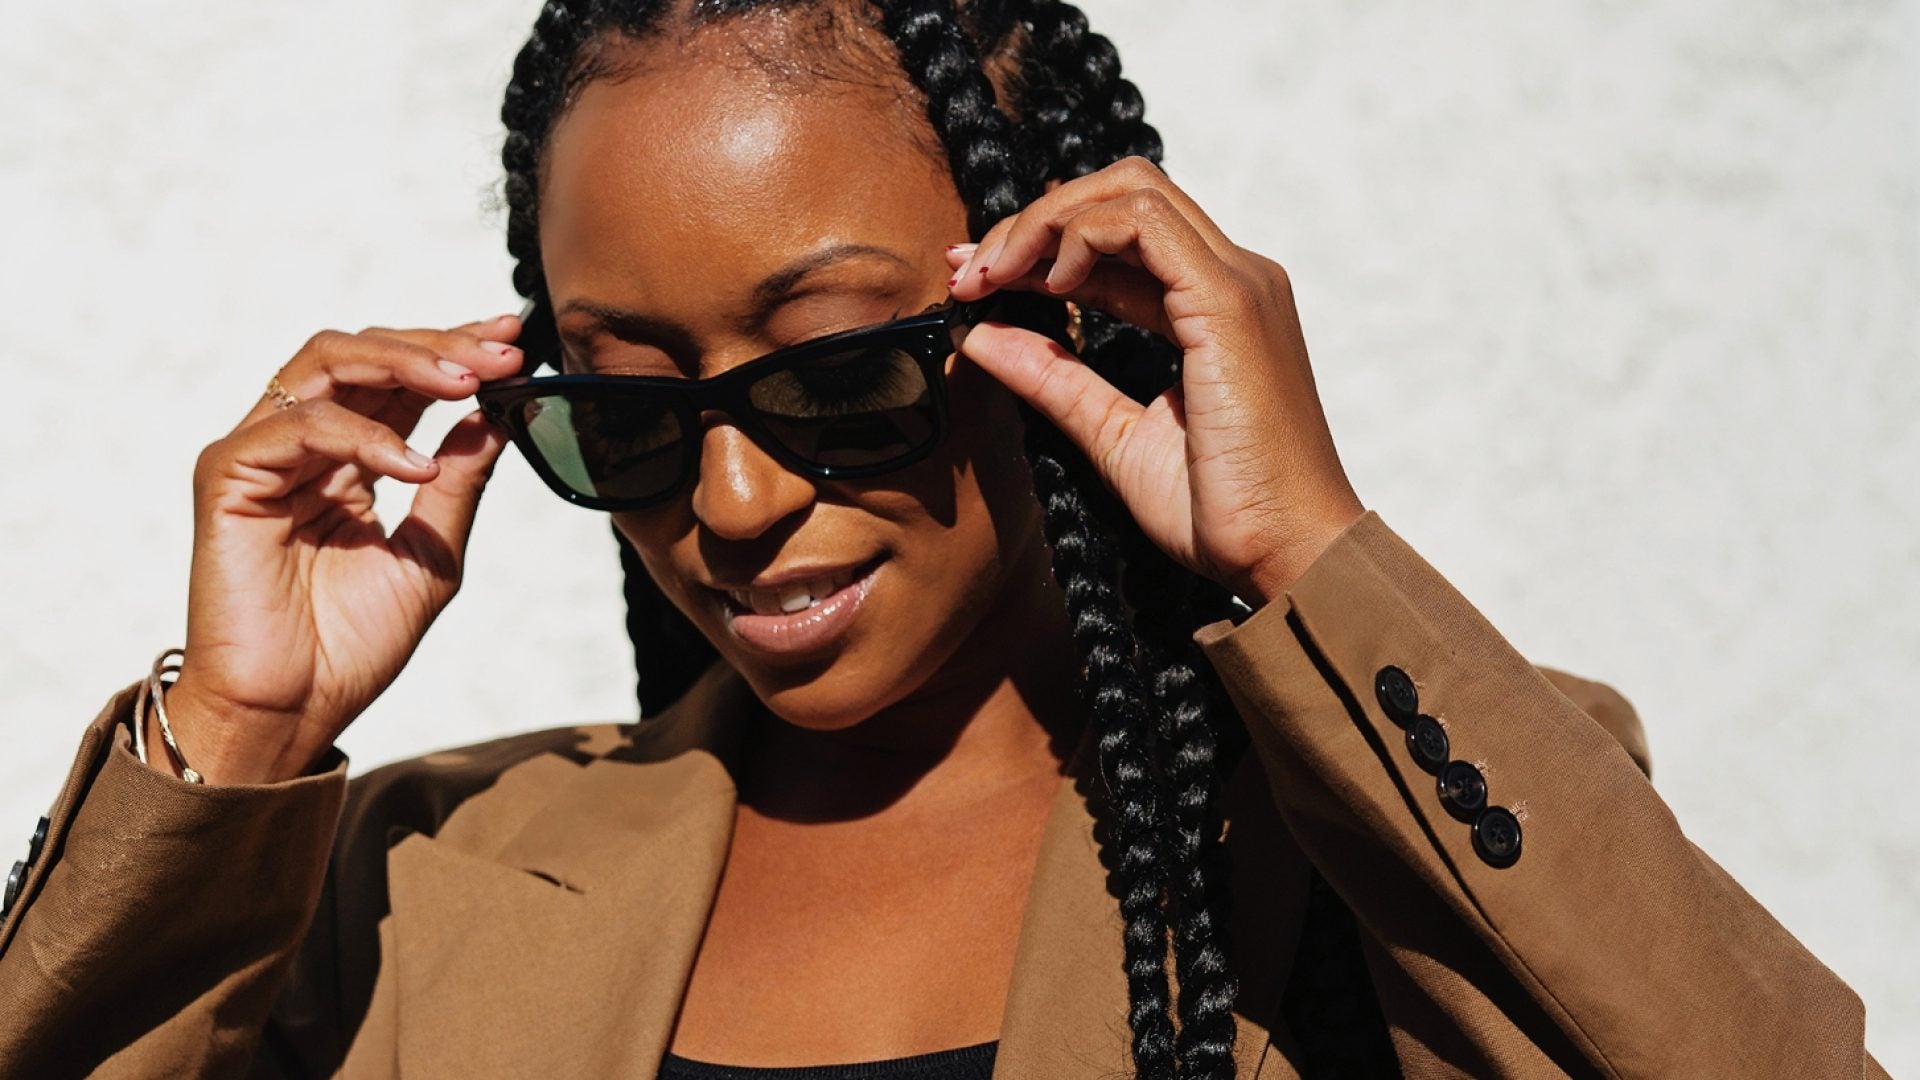 Stylist Shiona Turini On The Style 'Evolution' In 'Insecure' Season 5, Why She's Obsessed With Ray-Ban Stories Sunglasses